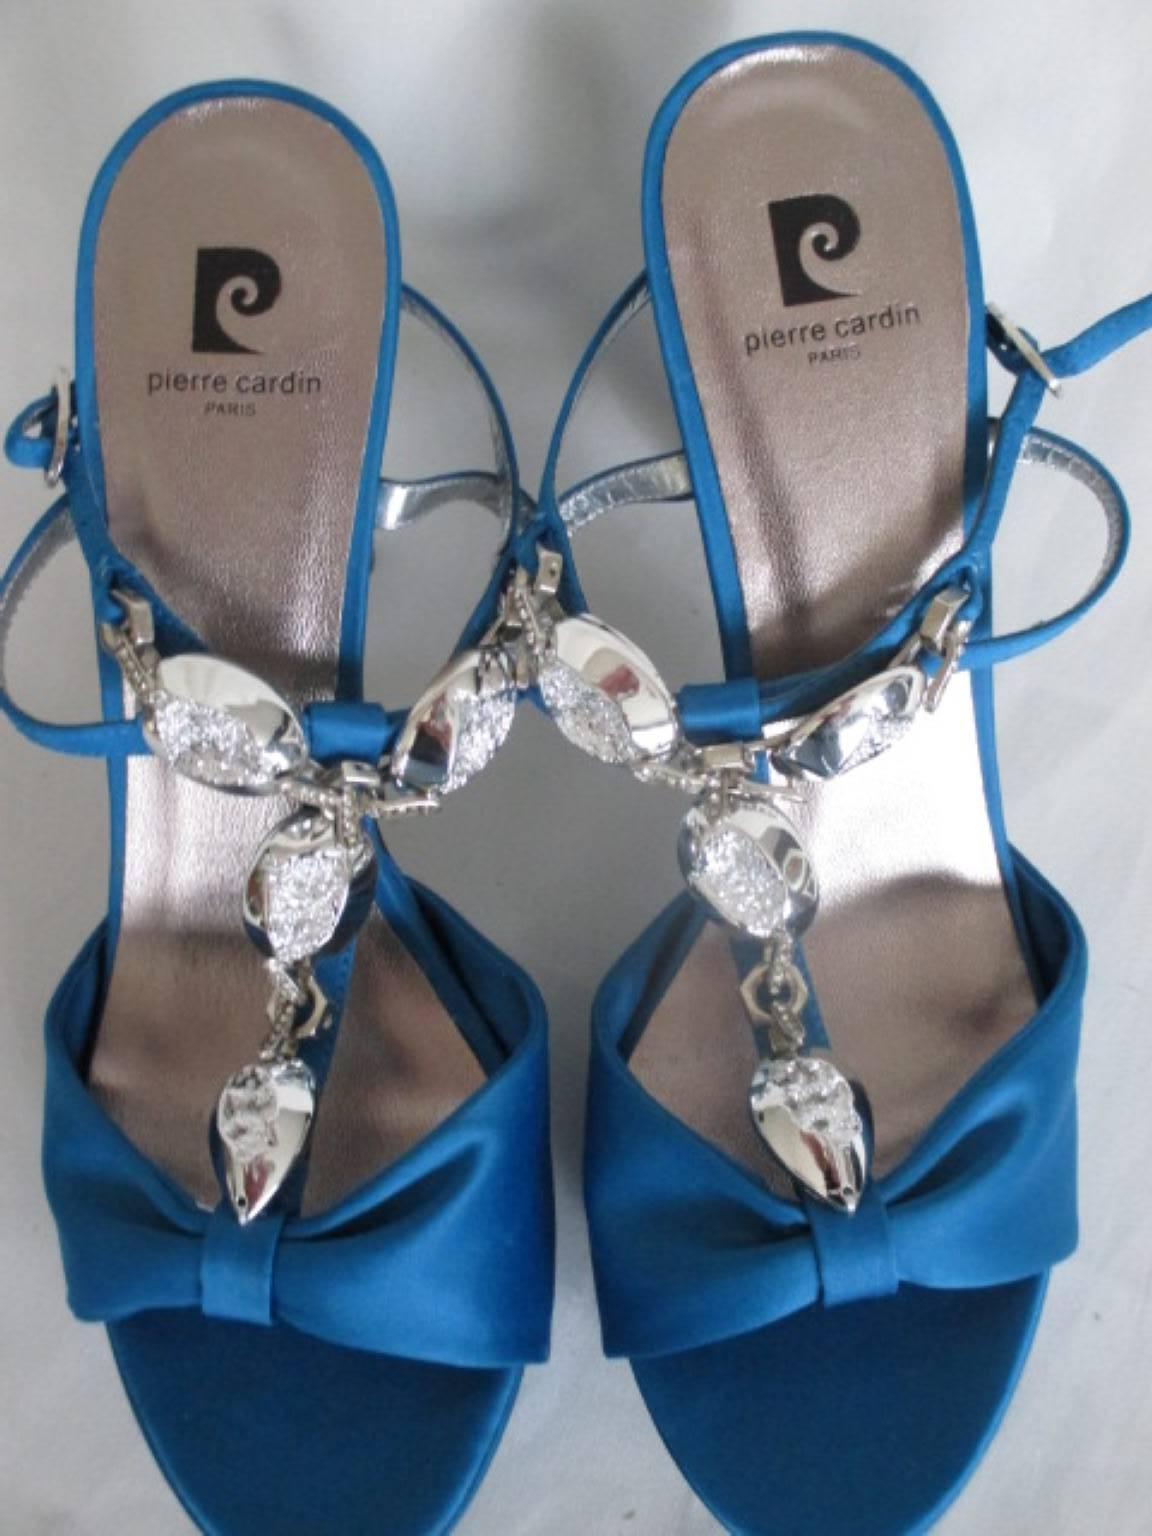 New in box, old stock, rare Pierre Cardin heels
The material is satin with silver color decorative stones
Its in excellent condition
Comes with the original box
size is EU 41/  US 10.5 /  UK 8.5
We offer this item also in pink in the same